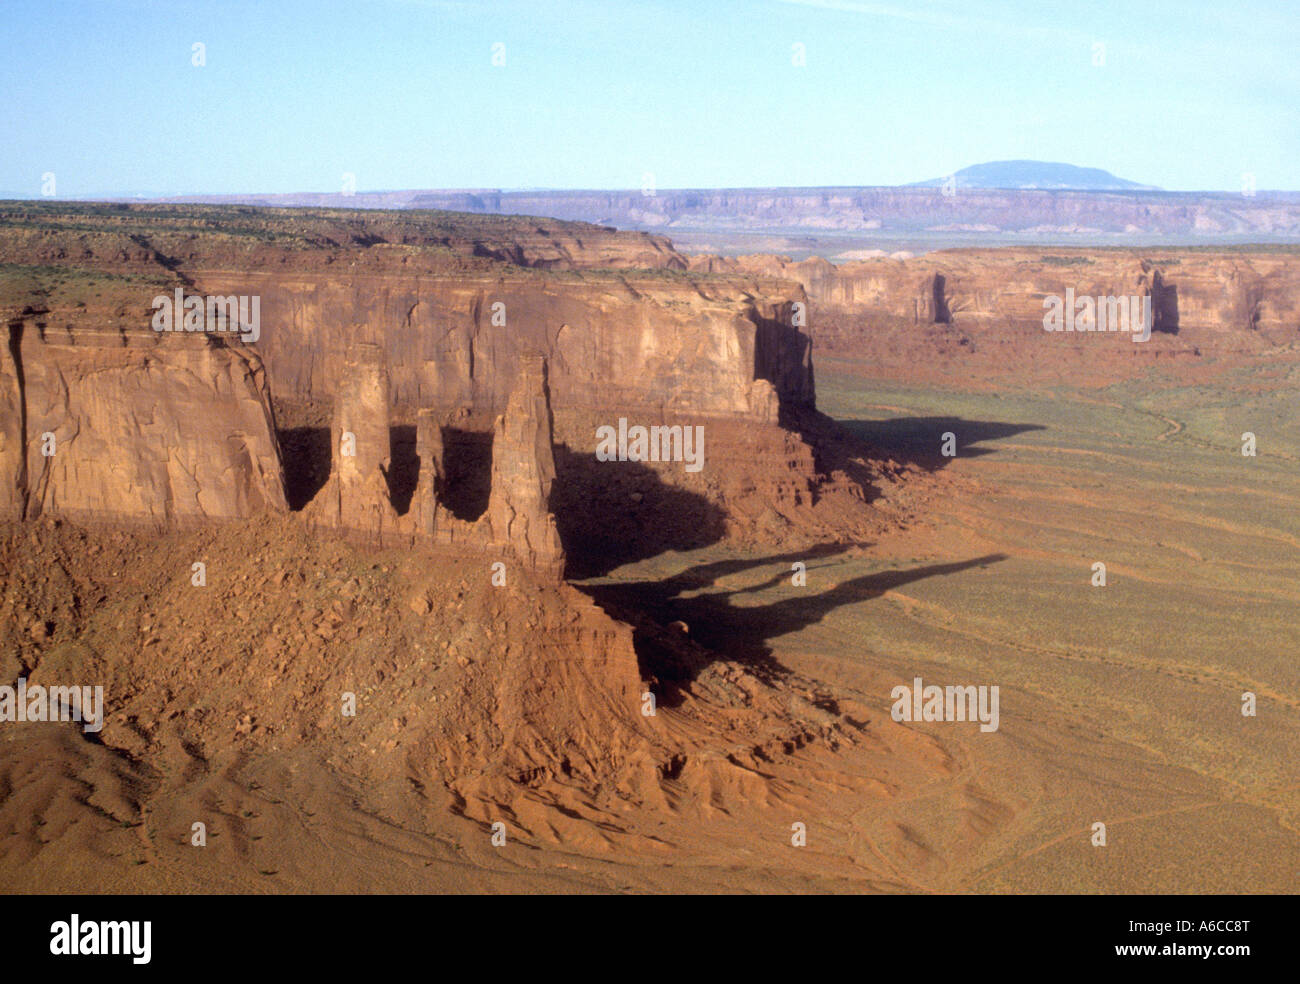 Ariel View Of Monument Valley In The American States Of Utah & Arizona. Stock Photo